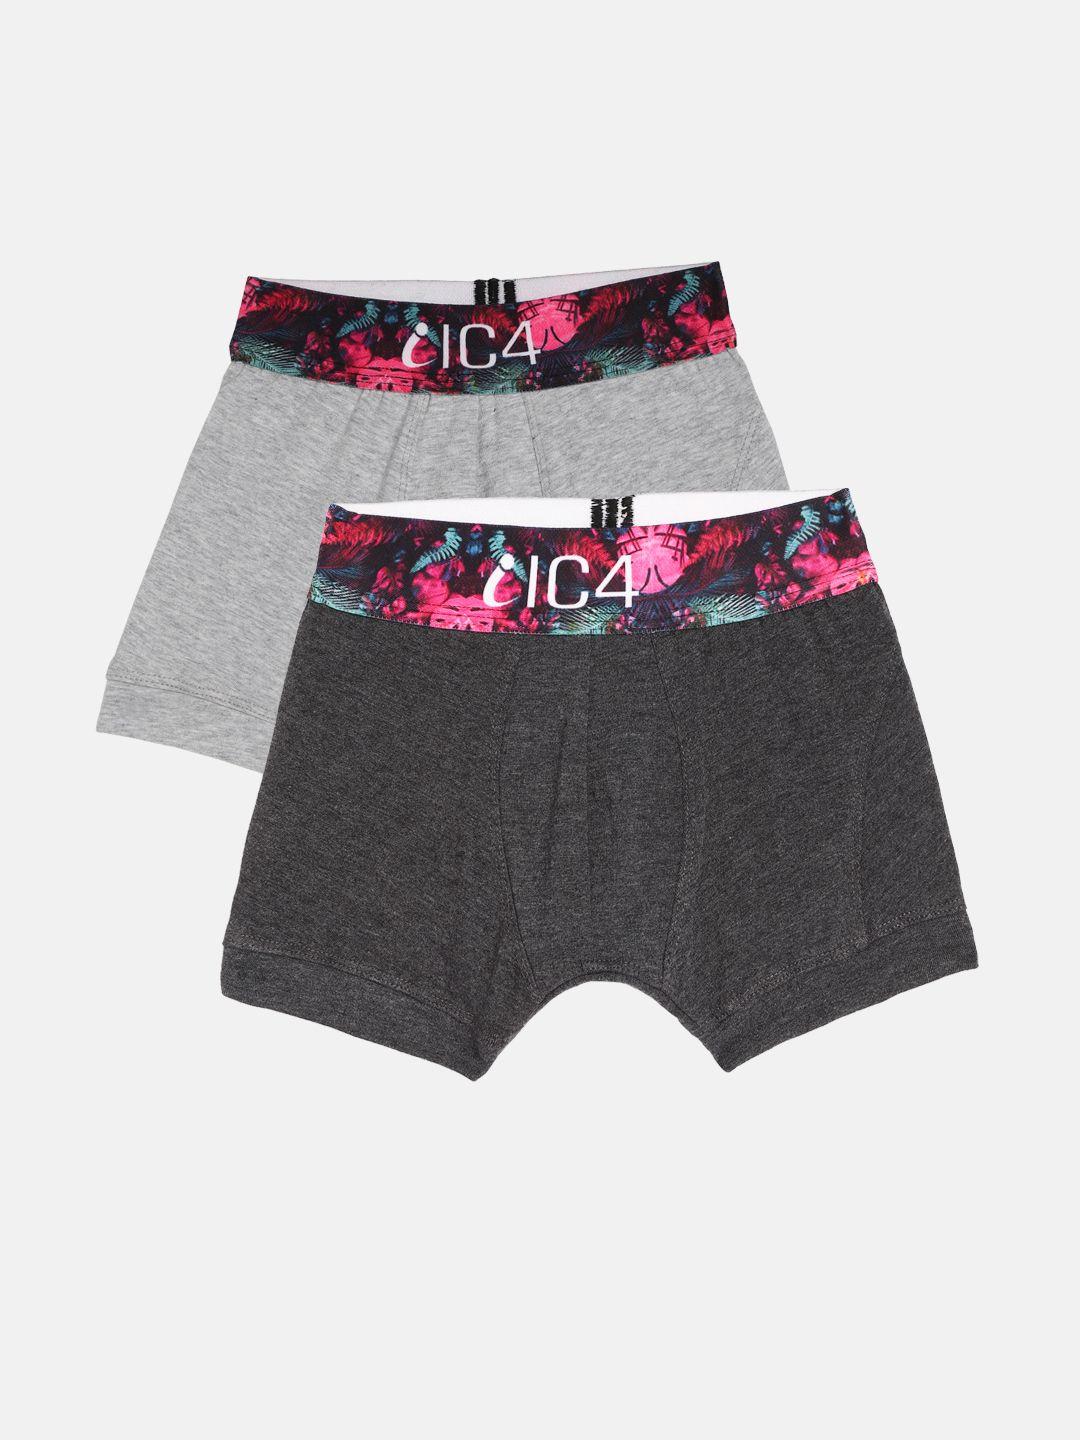 ic4 boys pack of 2 charcoal & grey solid trunks 0c-g-2001p2